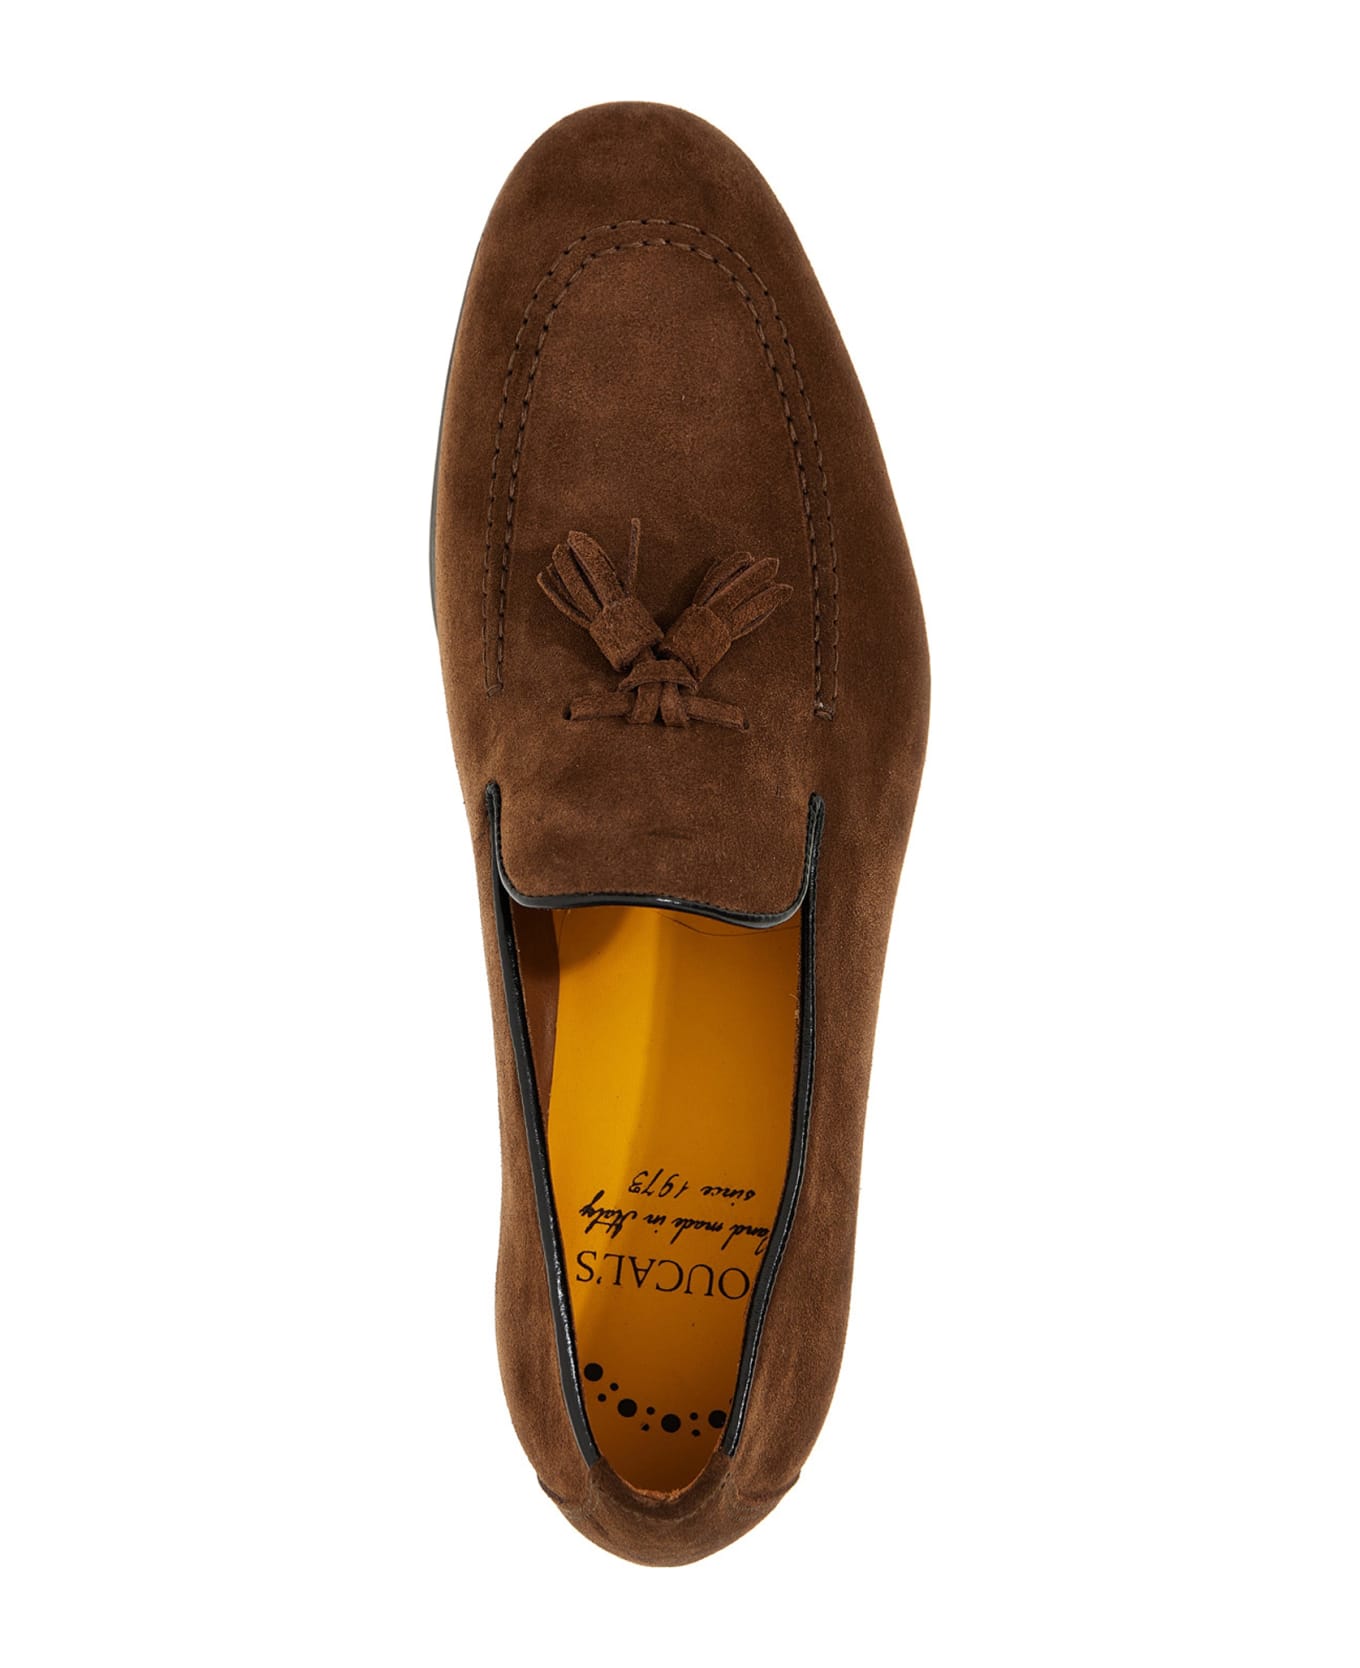 Doucal's Suede Loafers - Brown